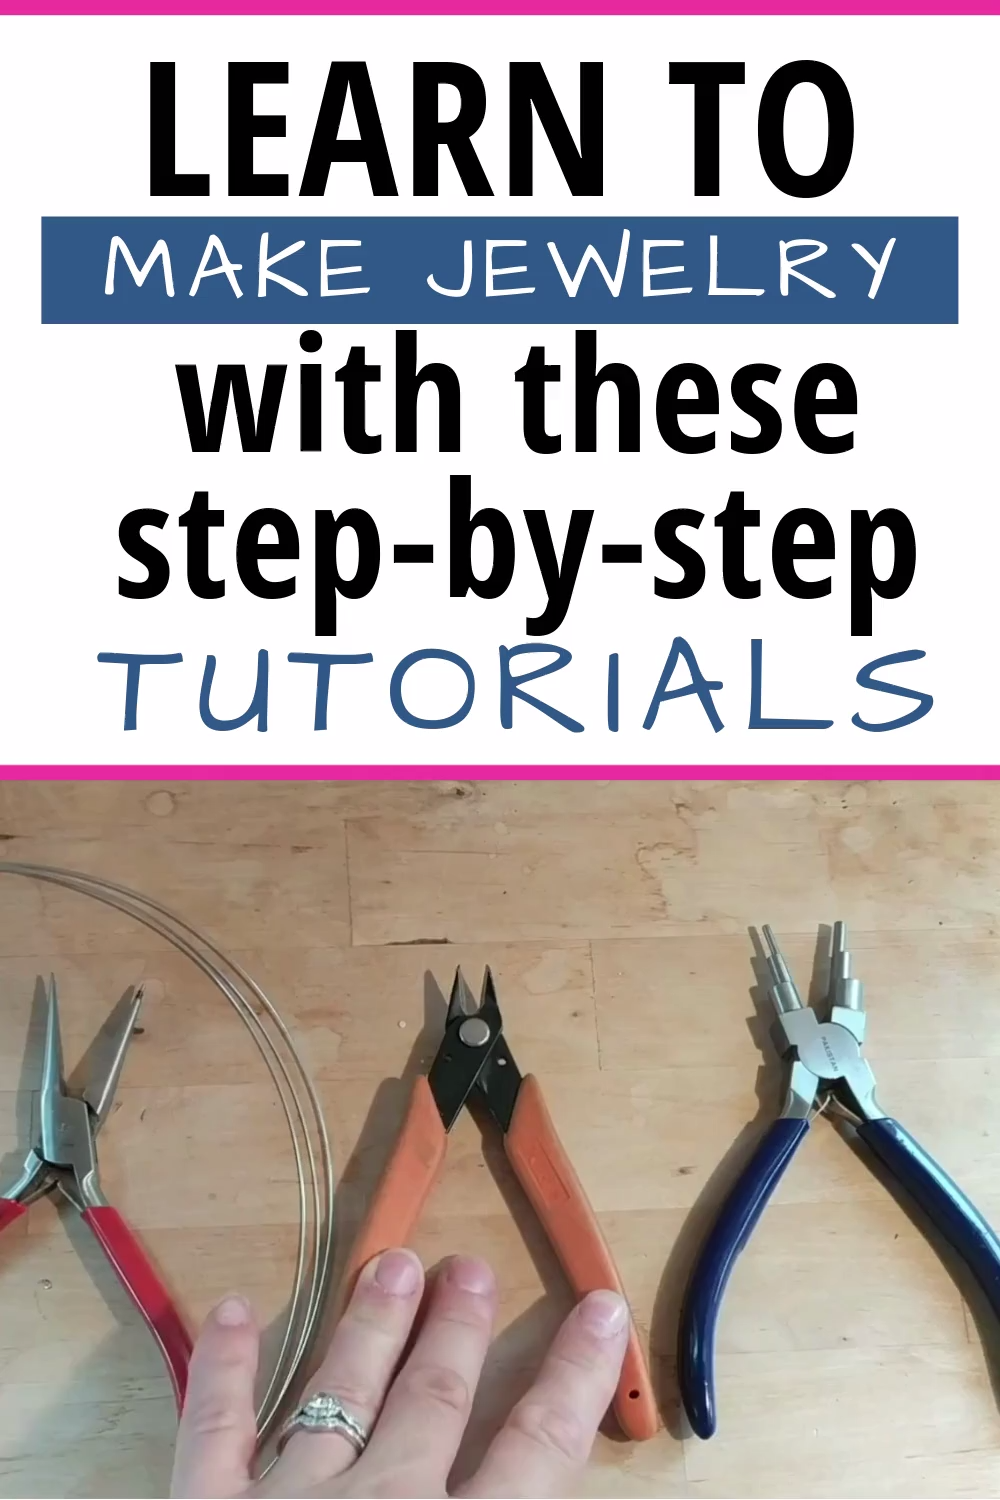 Jewelry making for beginners - Jewelry making for beginners -   17 diy Jewelry gifts ideas